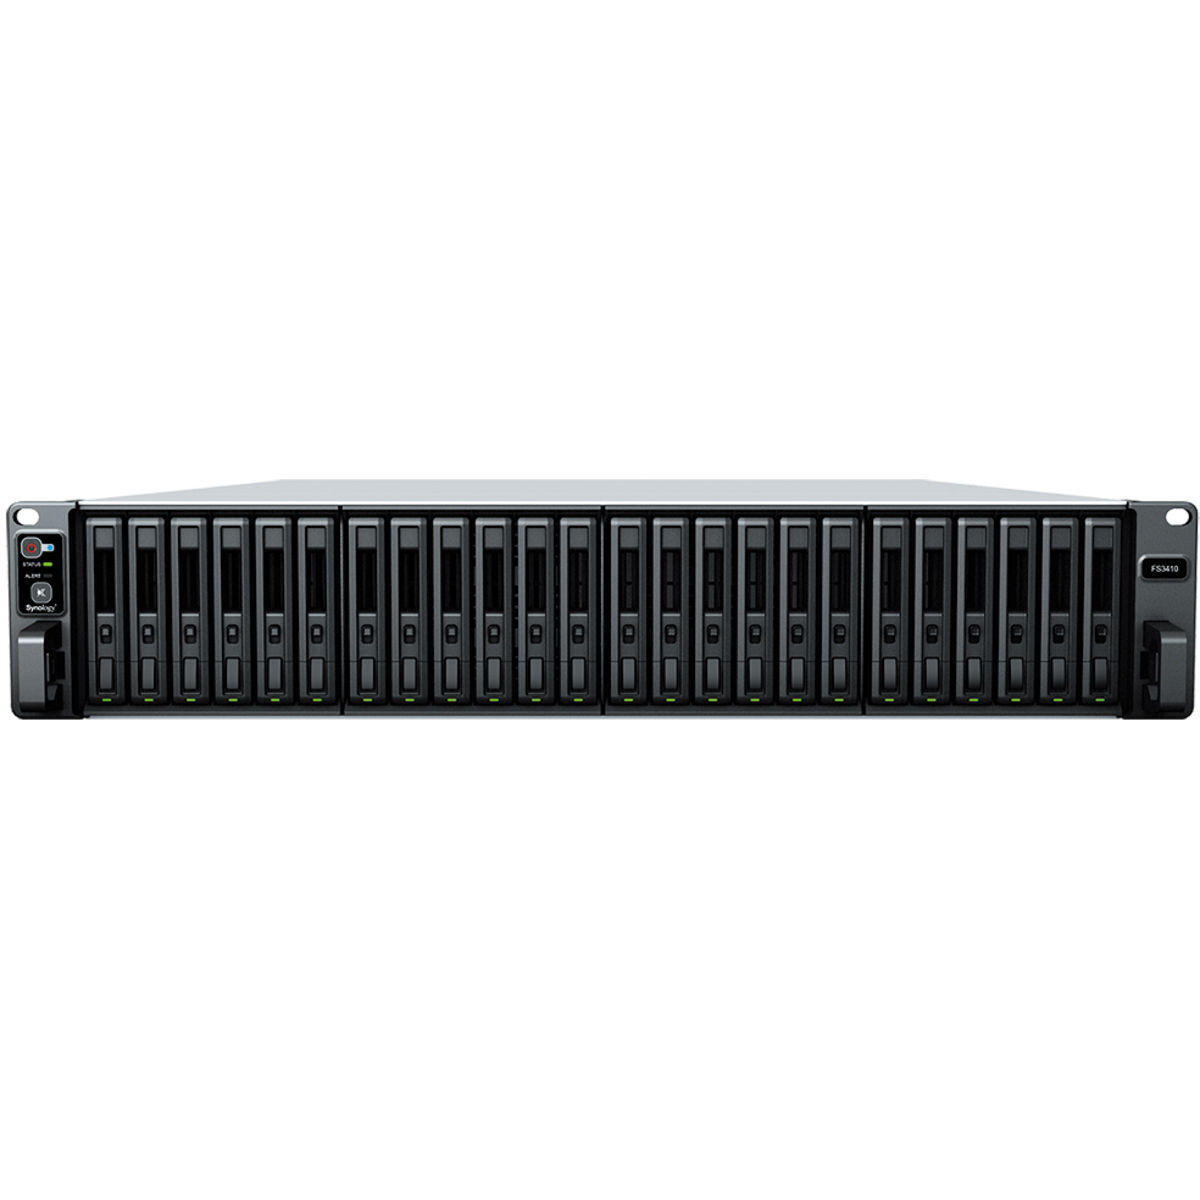 Synology FlashStation FS3410 84tb 24-Bay RackMount Large Business / Enterprise NAS - Network Attached Storage Device 21x4tb Western Digital Red SA500 WDS400T1R0A 2.5 560/530MB/s SATA 6Gb/s SSD NAS Class Drives Installed - Burn-In Tested FlashStation FS3410